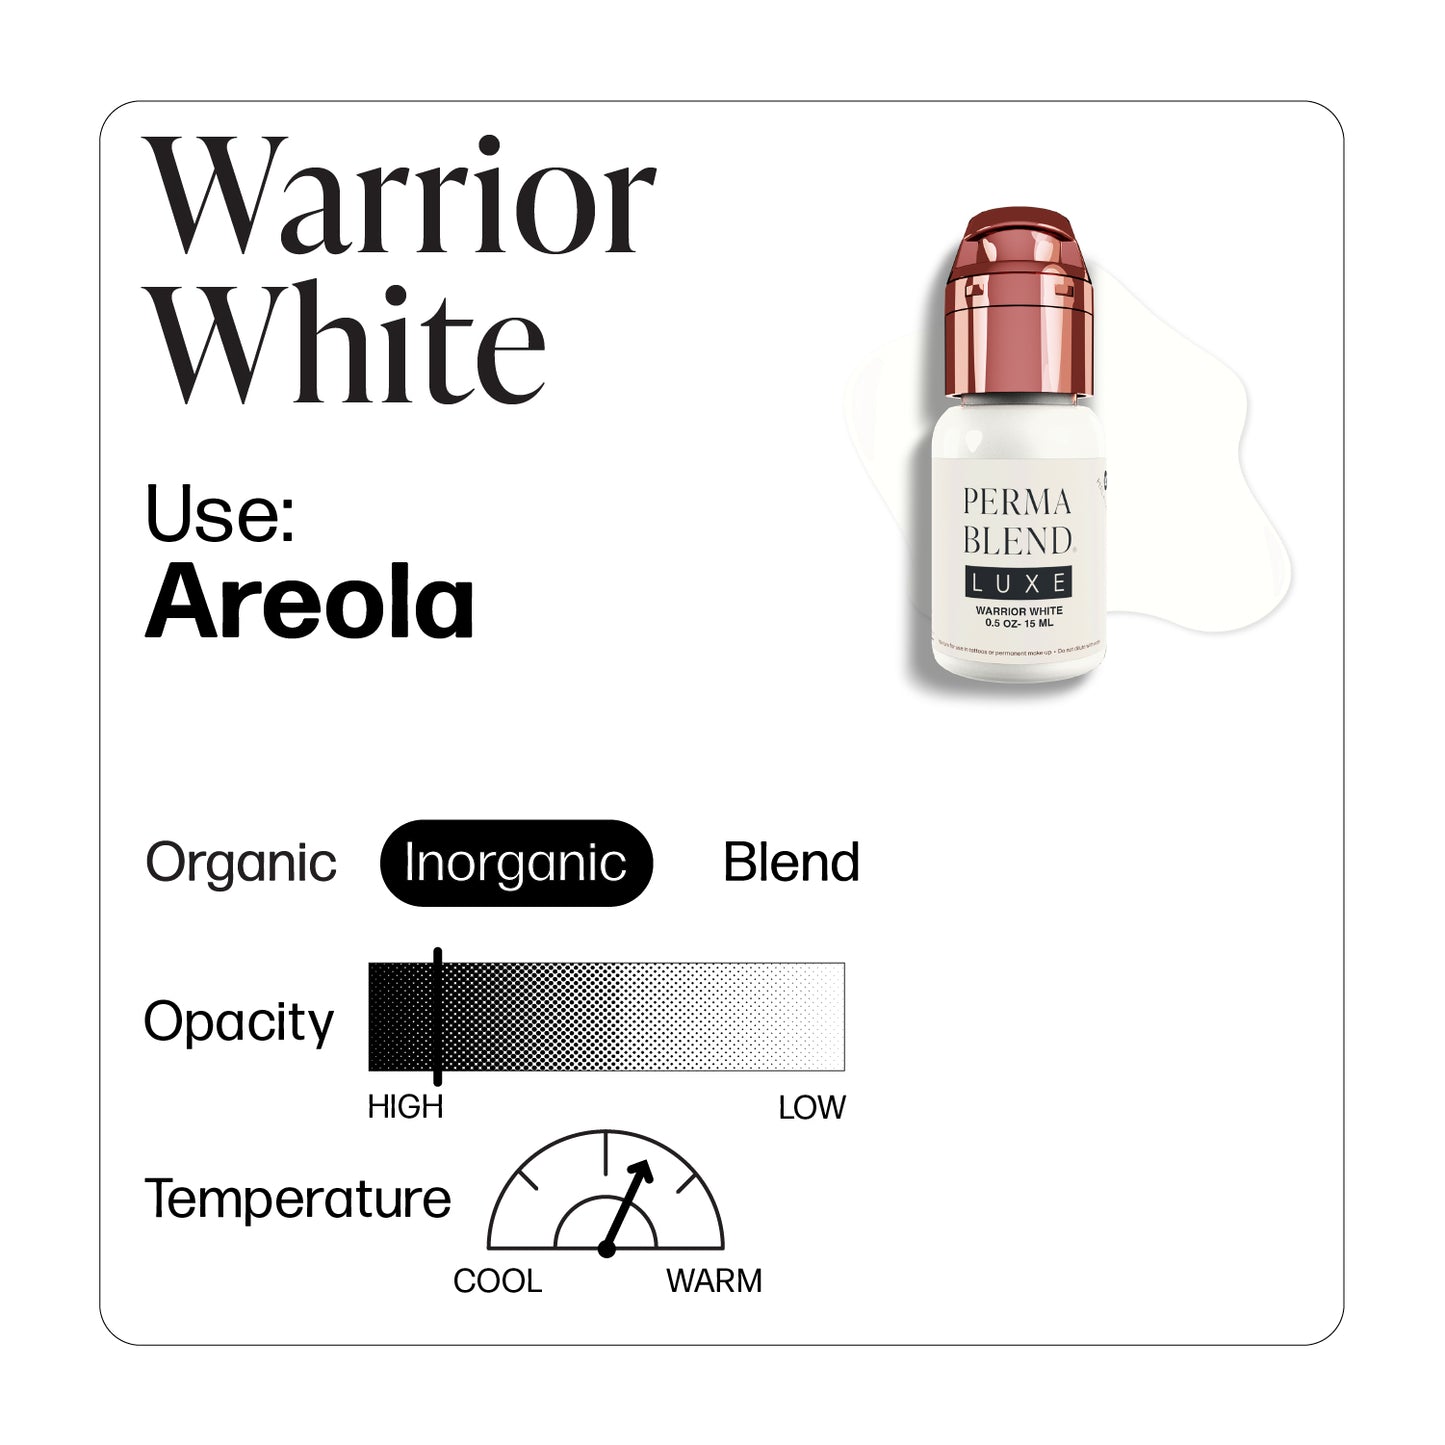 LUXE Warrior White - Vicky Martin Unstoppable AreolaLUXE Warrior White - Vicky Martin Unstoppable Areola